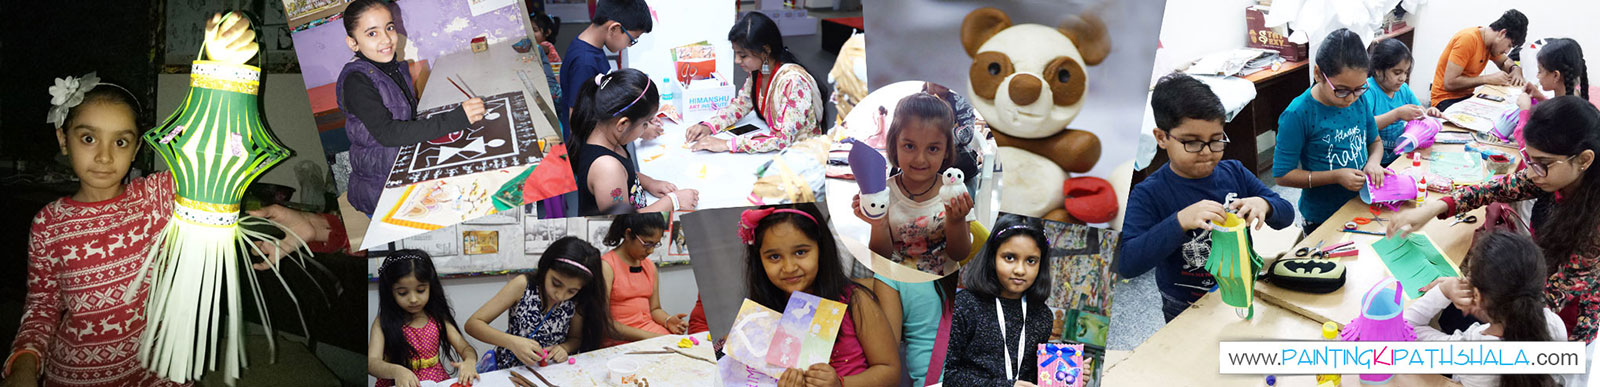 Drawing, Painting, Art & Craft, Hobby Classes for Kids and Adults